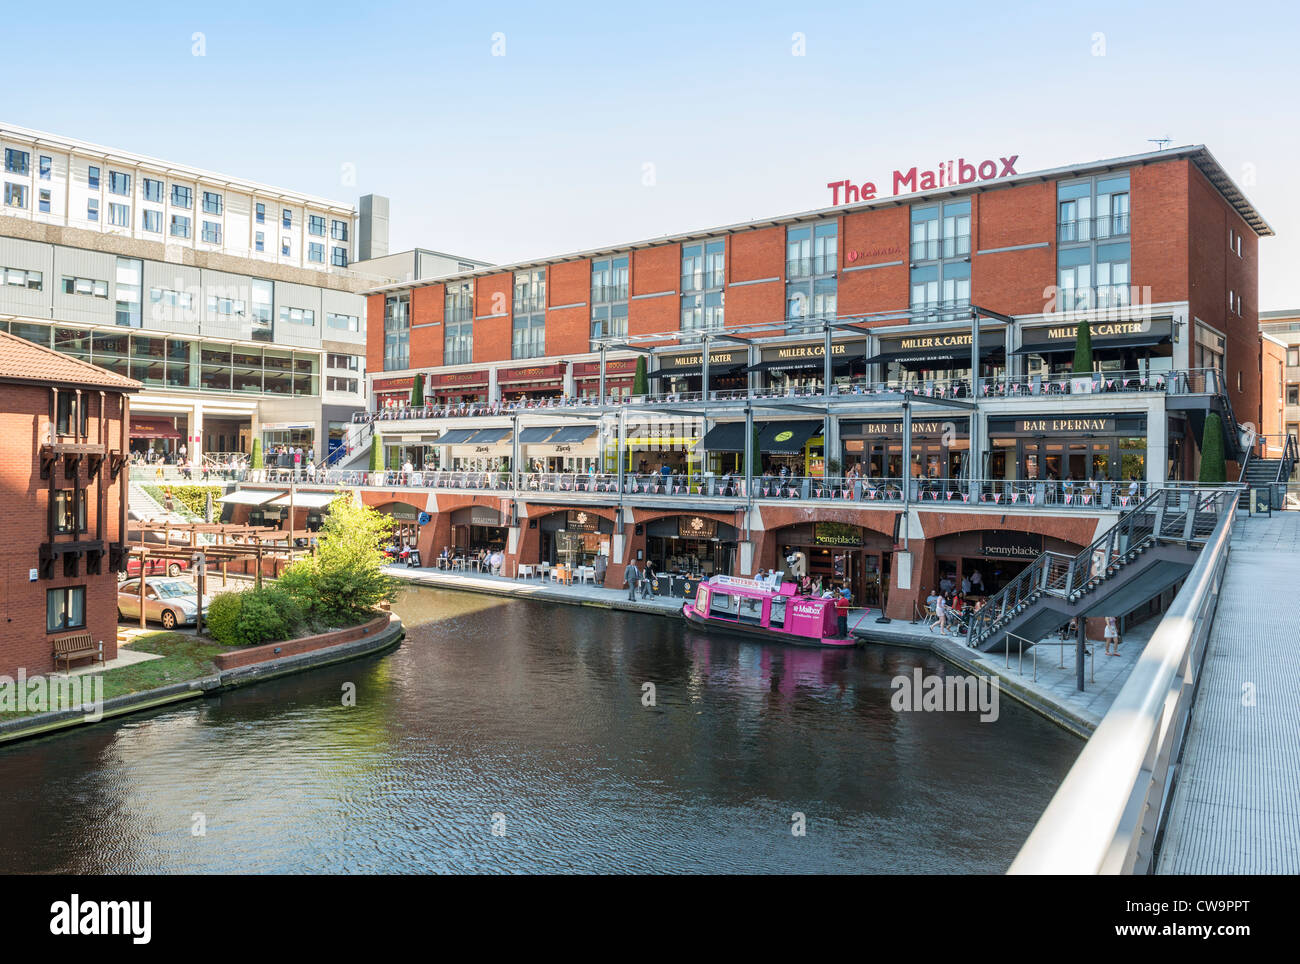 Bars and restaurants alongside the canals at The Mailbox, Birmingham